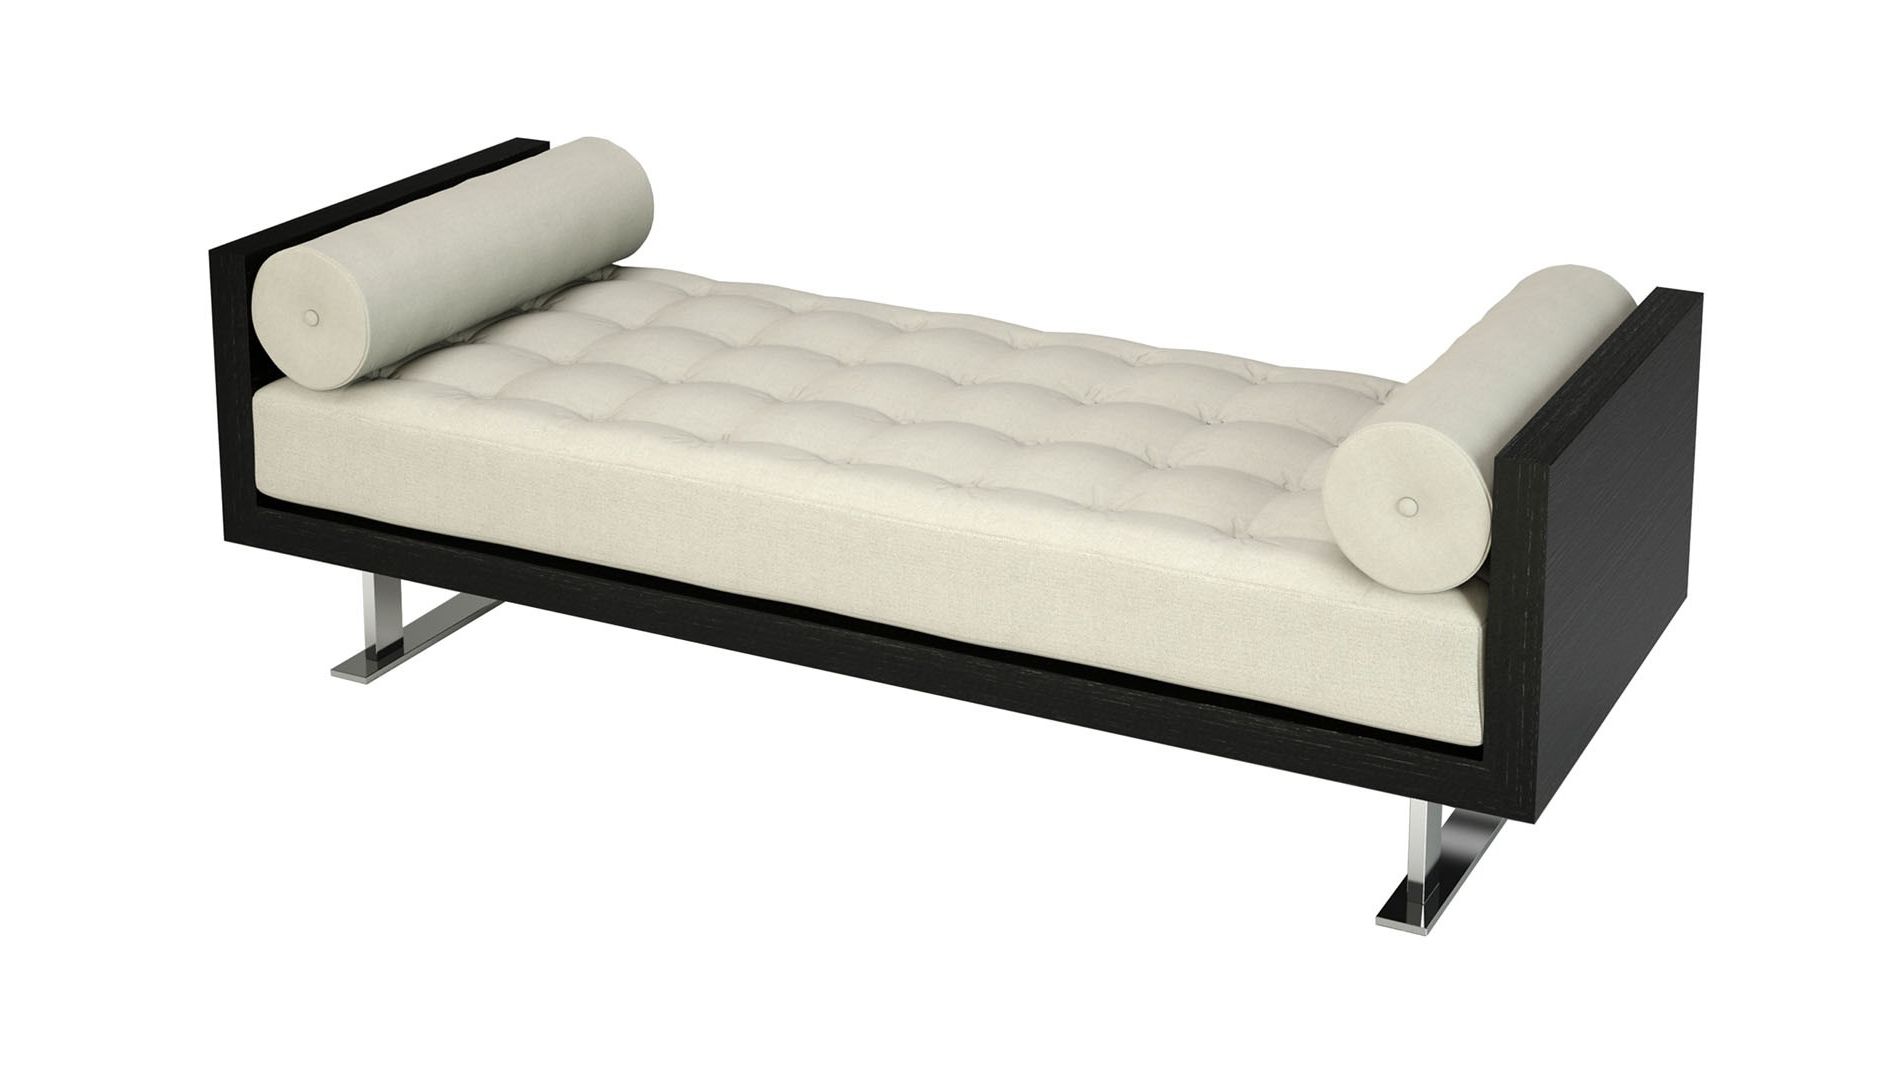 Most Recent Modern Chaise Longues Inside Epoca, Urban Chaise Longue, Buy Online At Luxdeco (View 8 of 15)